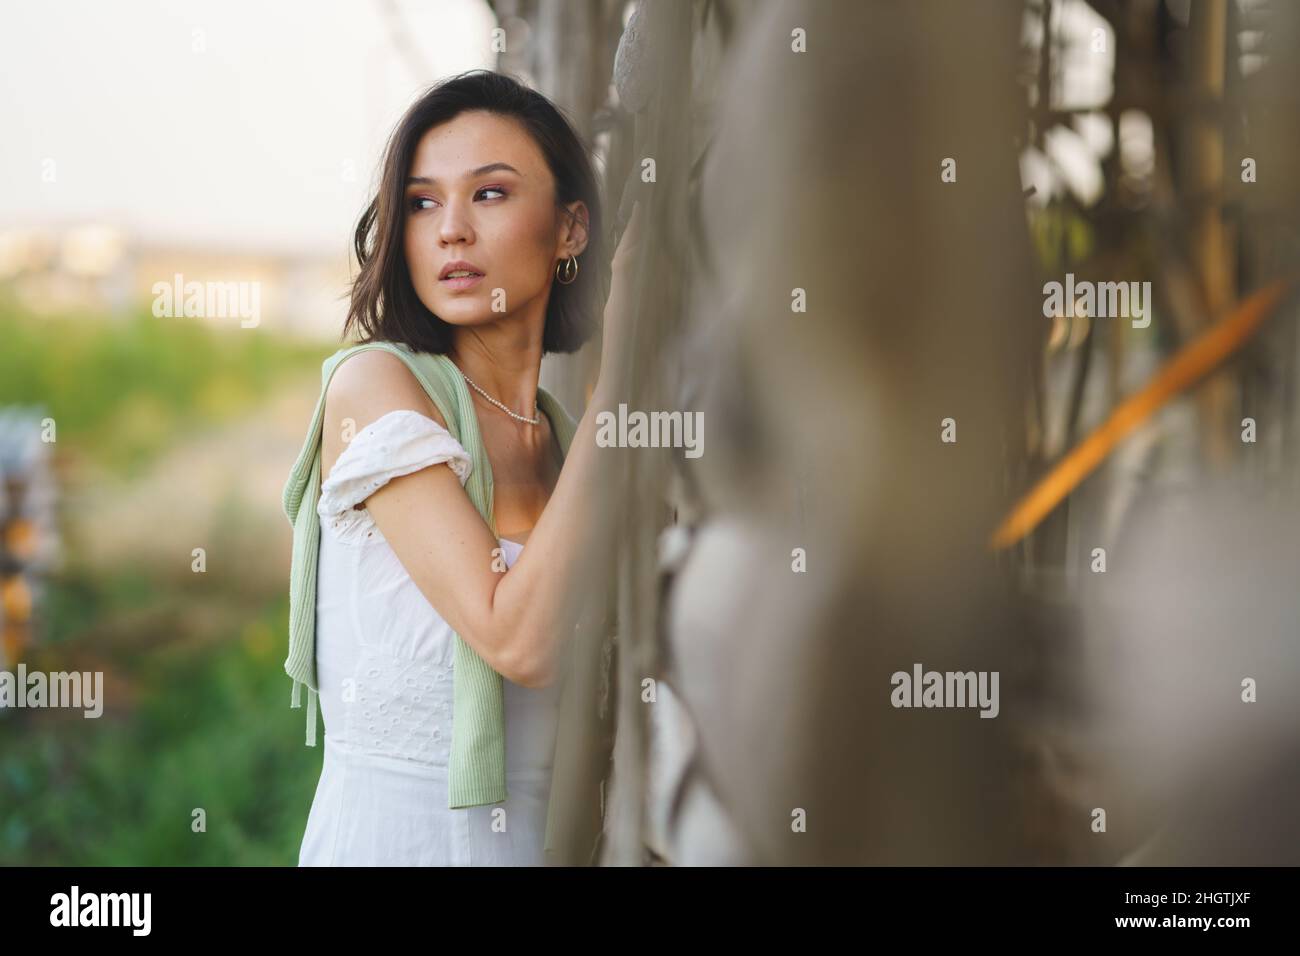 Asian woman, posing near a tobacco drying shed, wearing a white dress and green wellies. Stock Photo